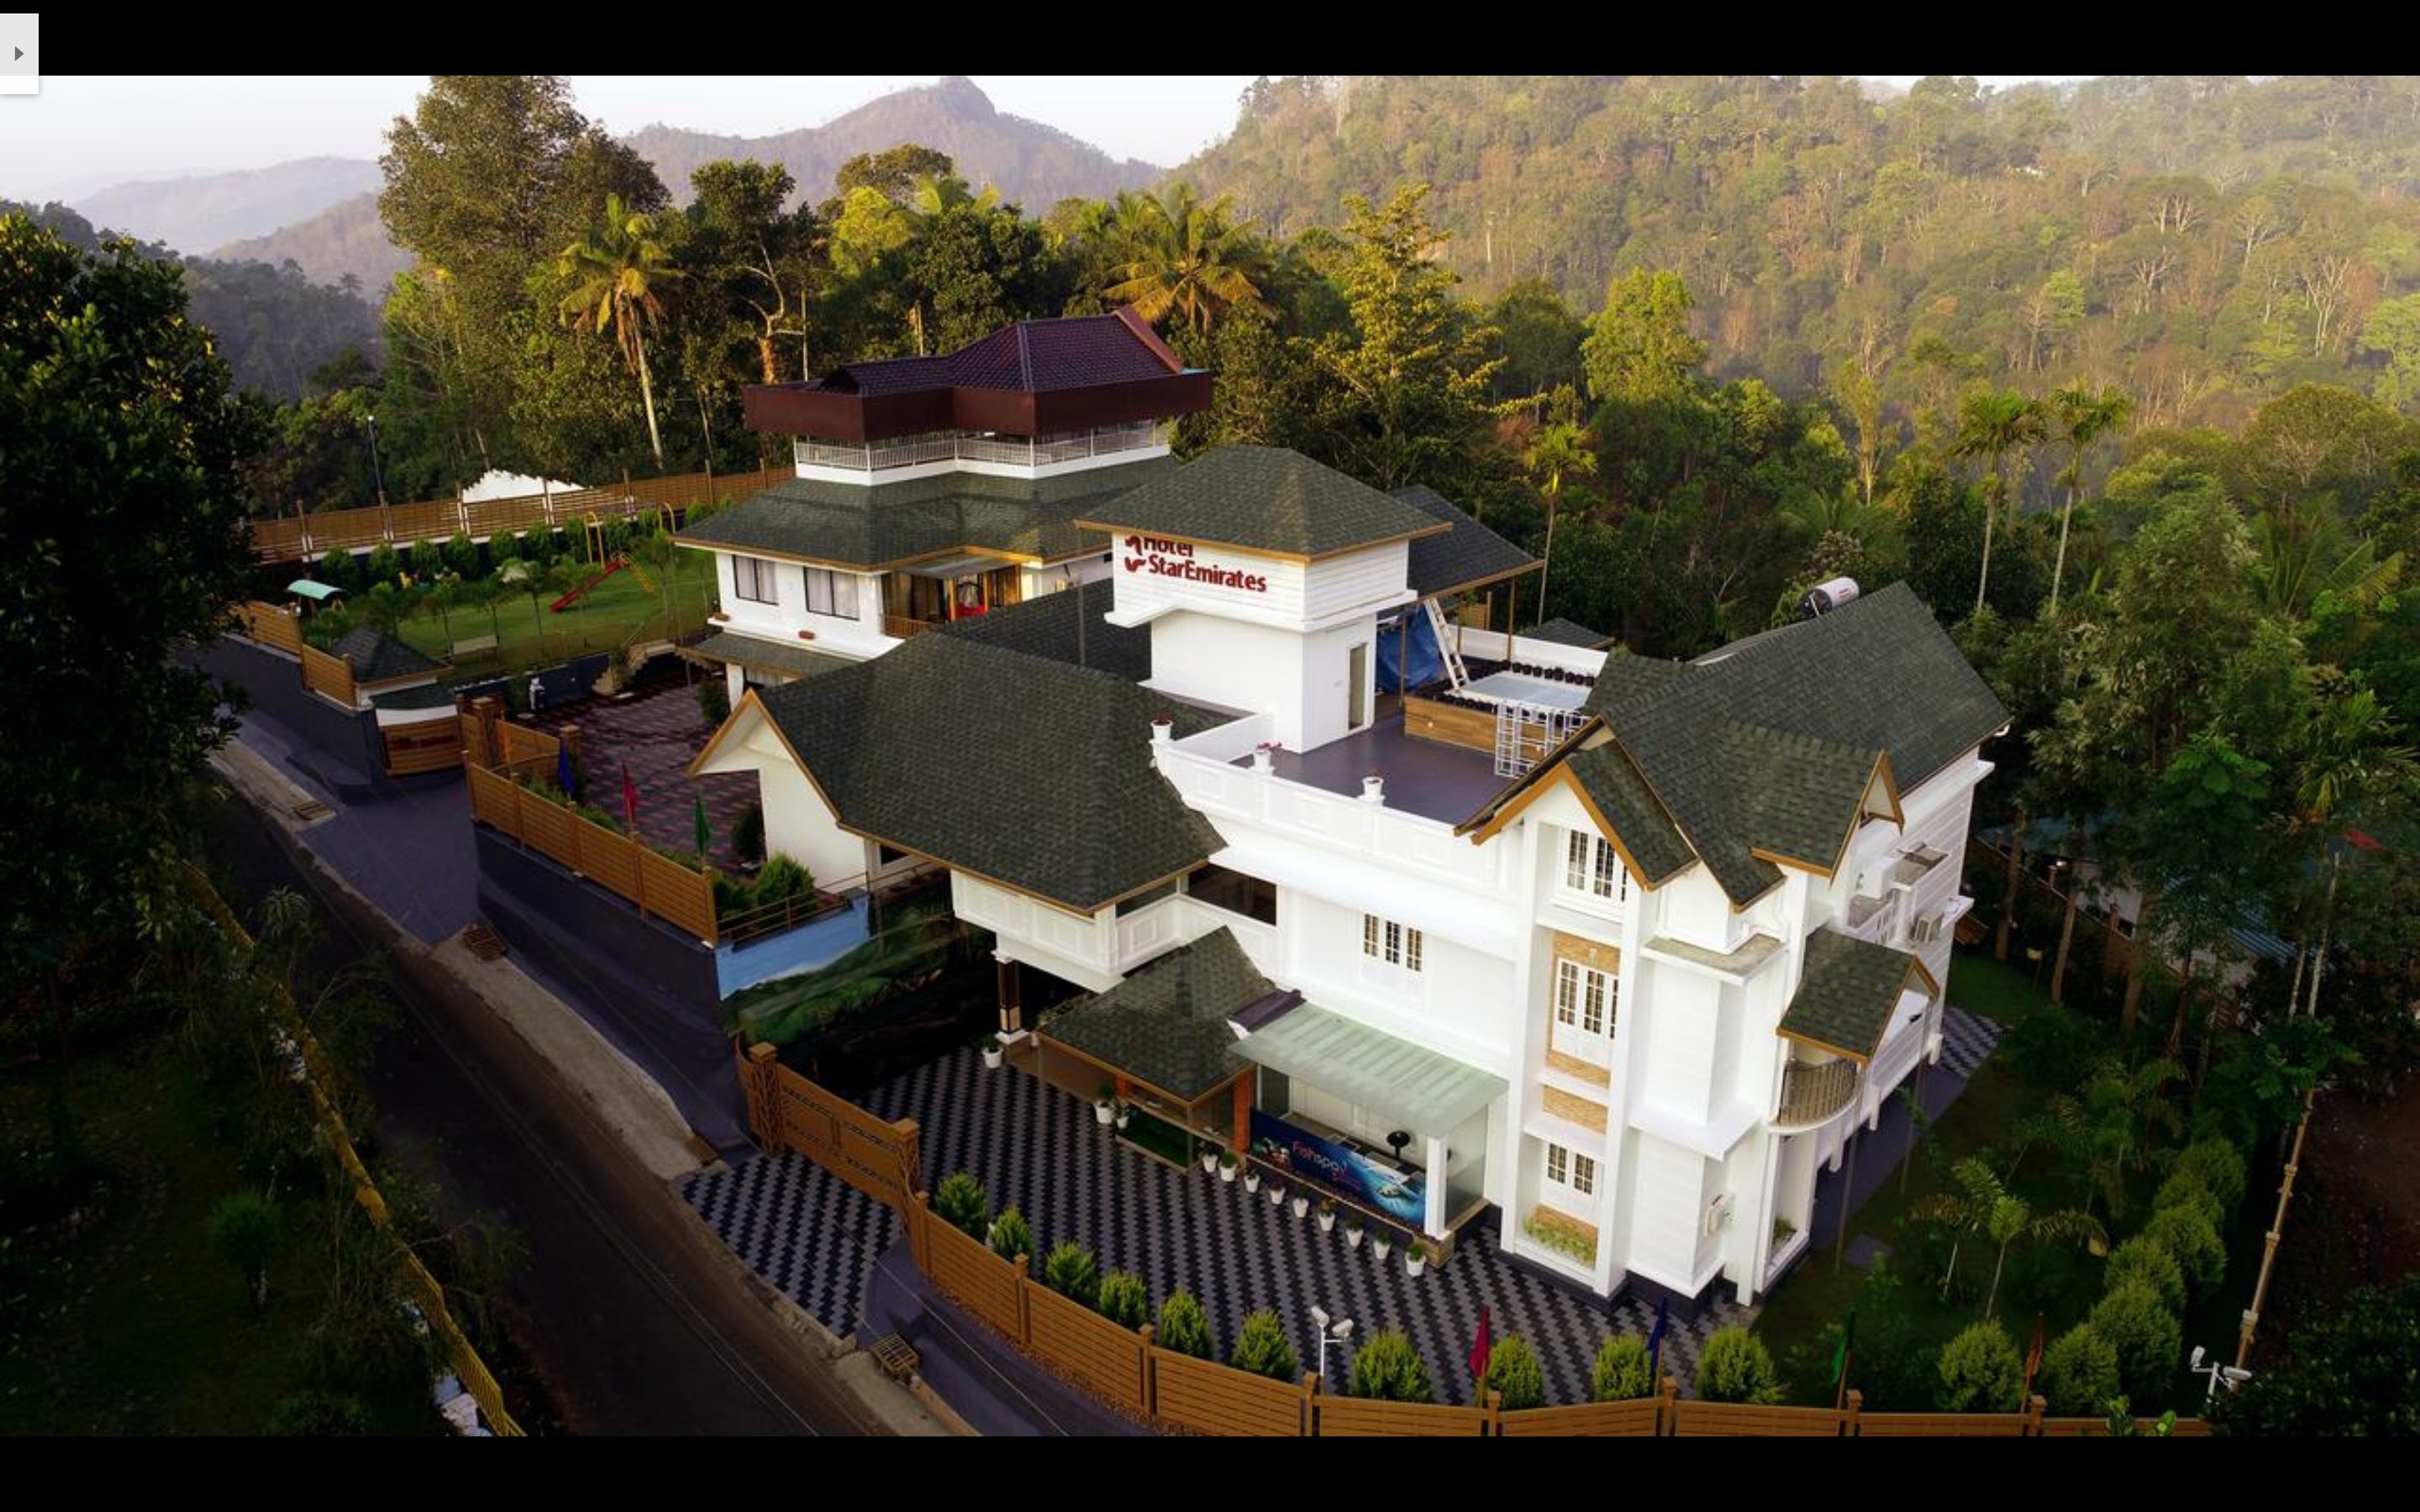 Hotel Star Emirates Munnar, built beyond elegance is ideally located in Ambazhachal, 17 km from Munnar which is a breathtakingly beautiful haven